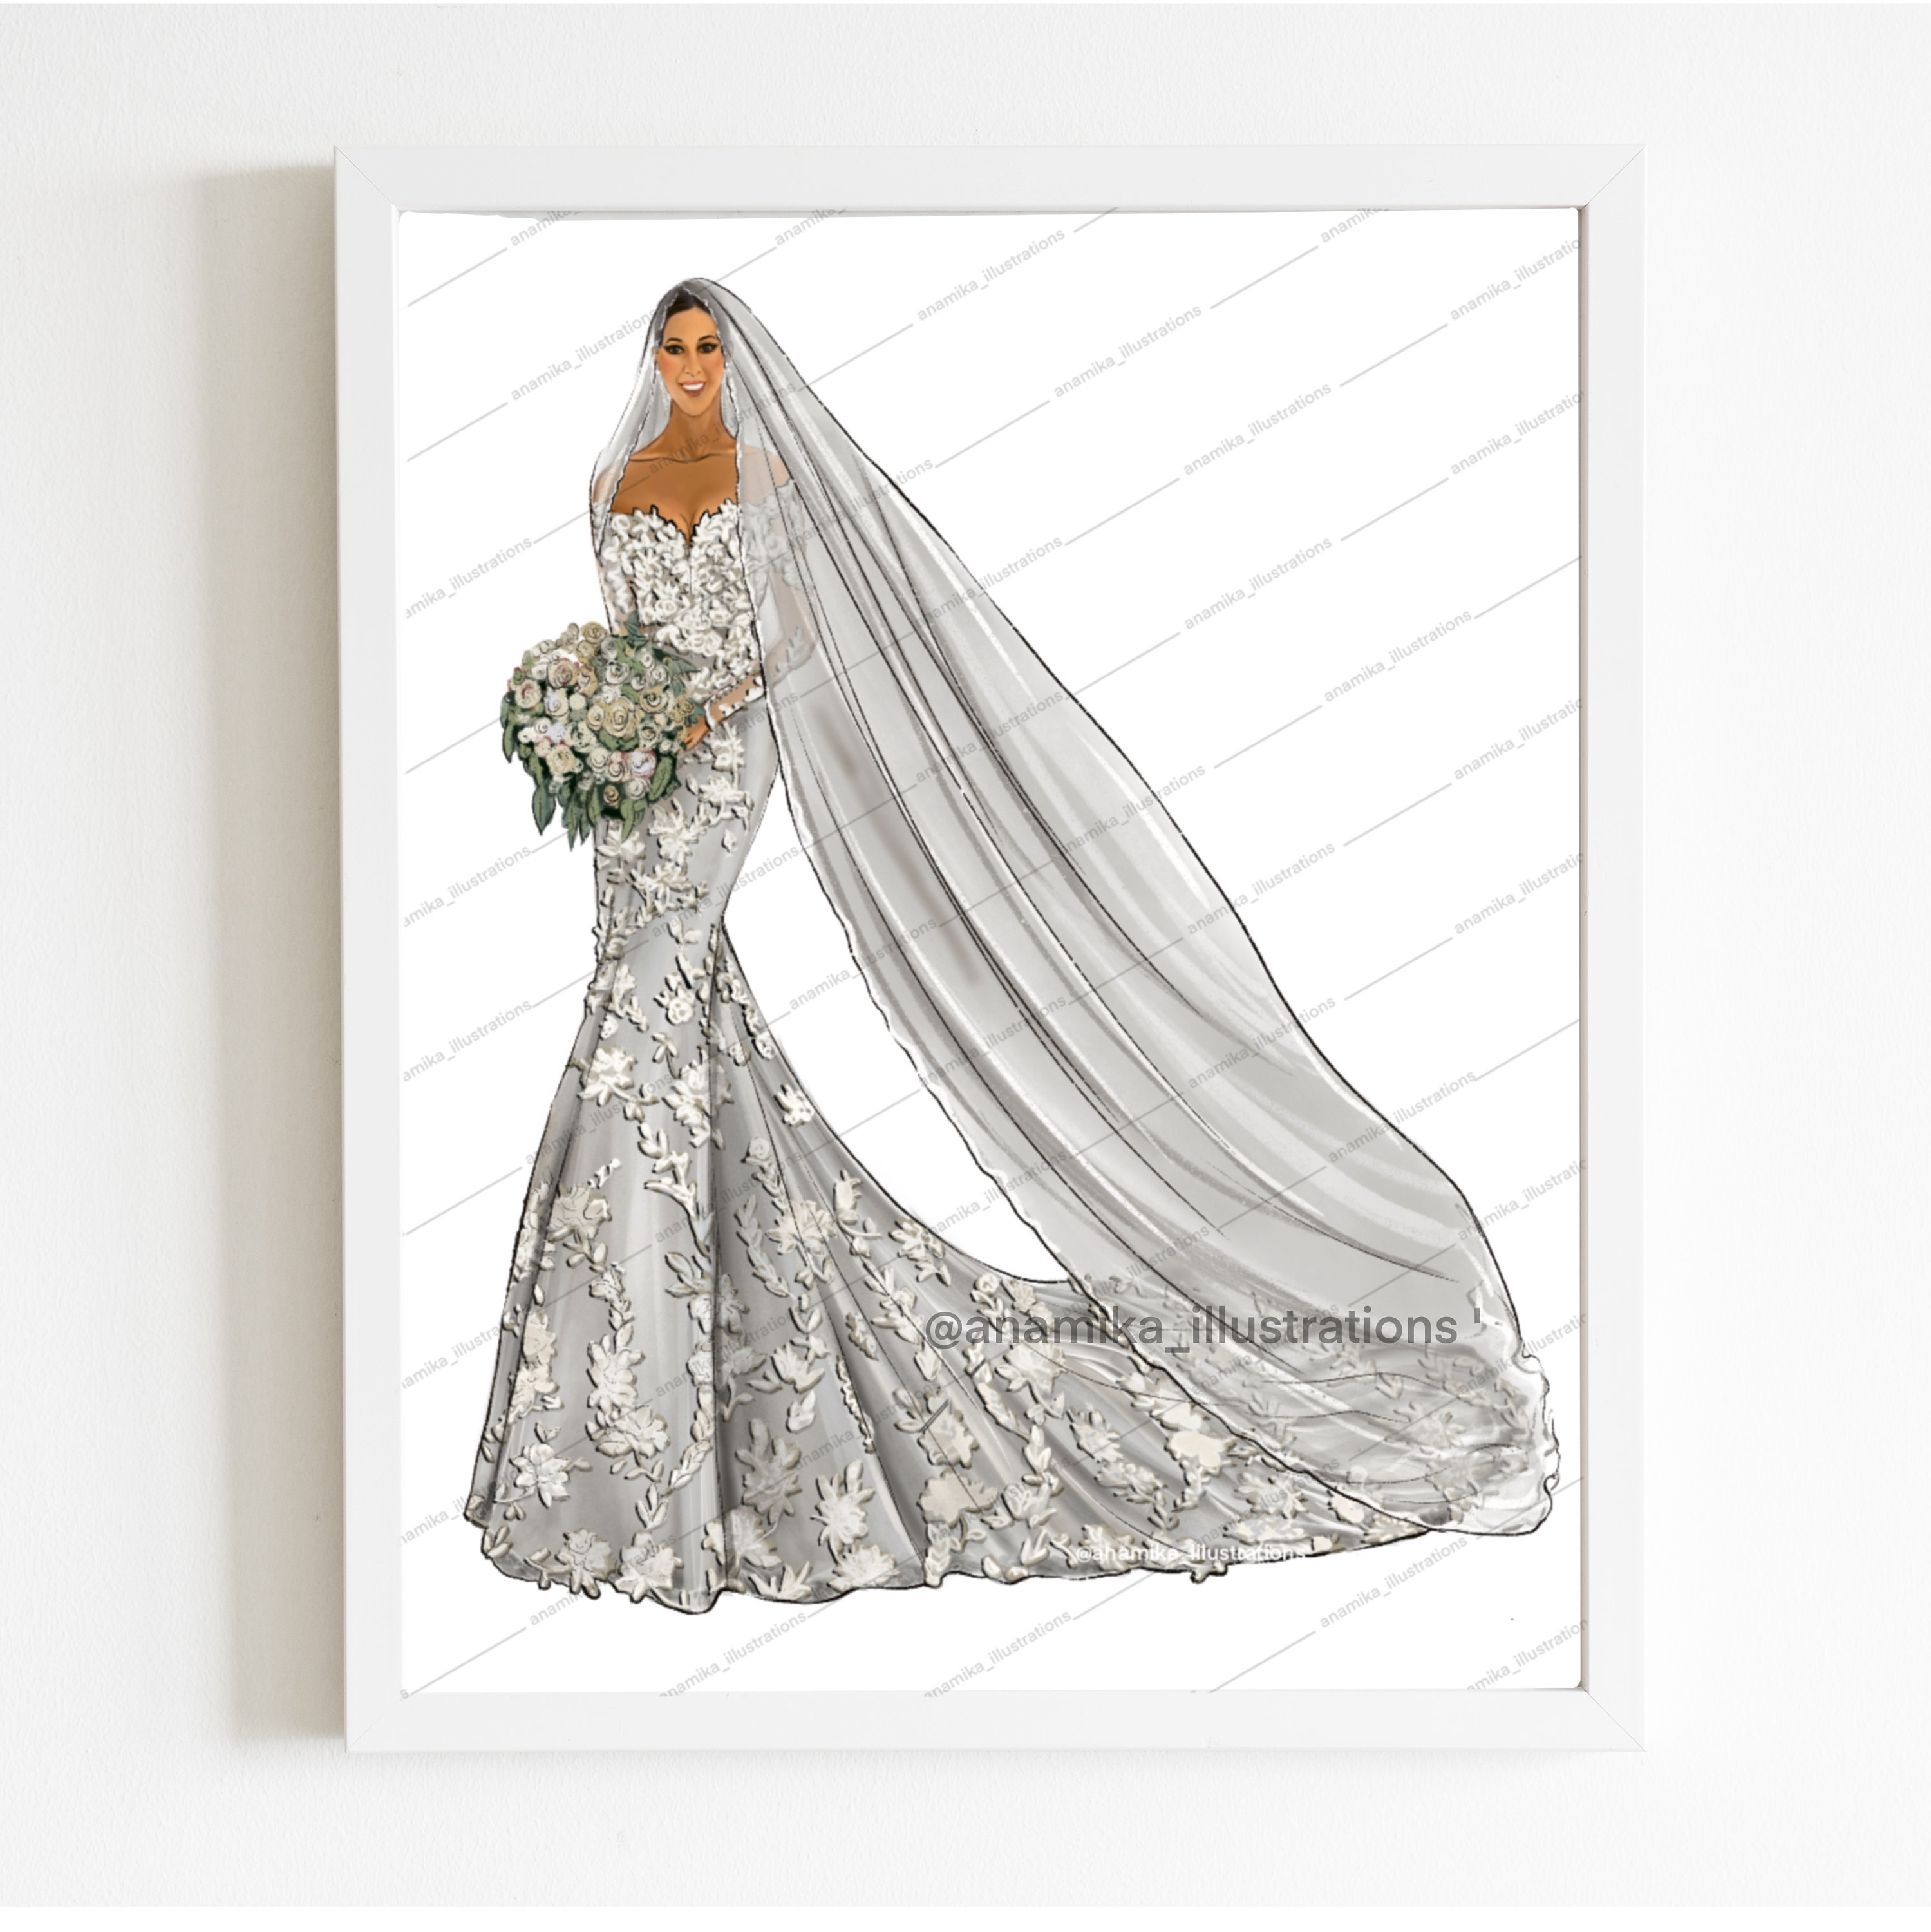 Premium Vector  A line drawing of a dress with a wedding dress